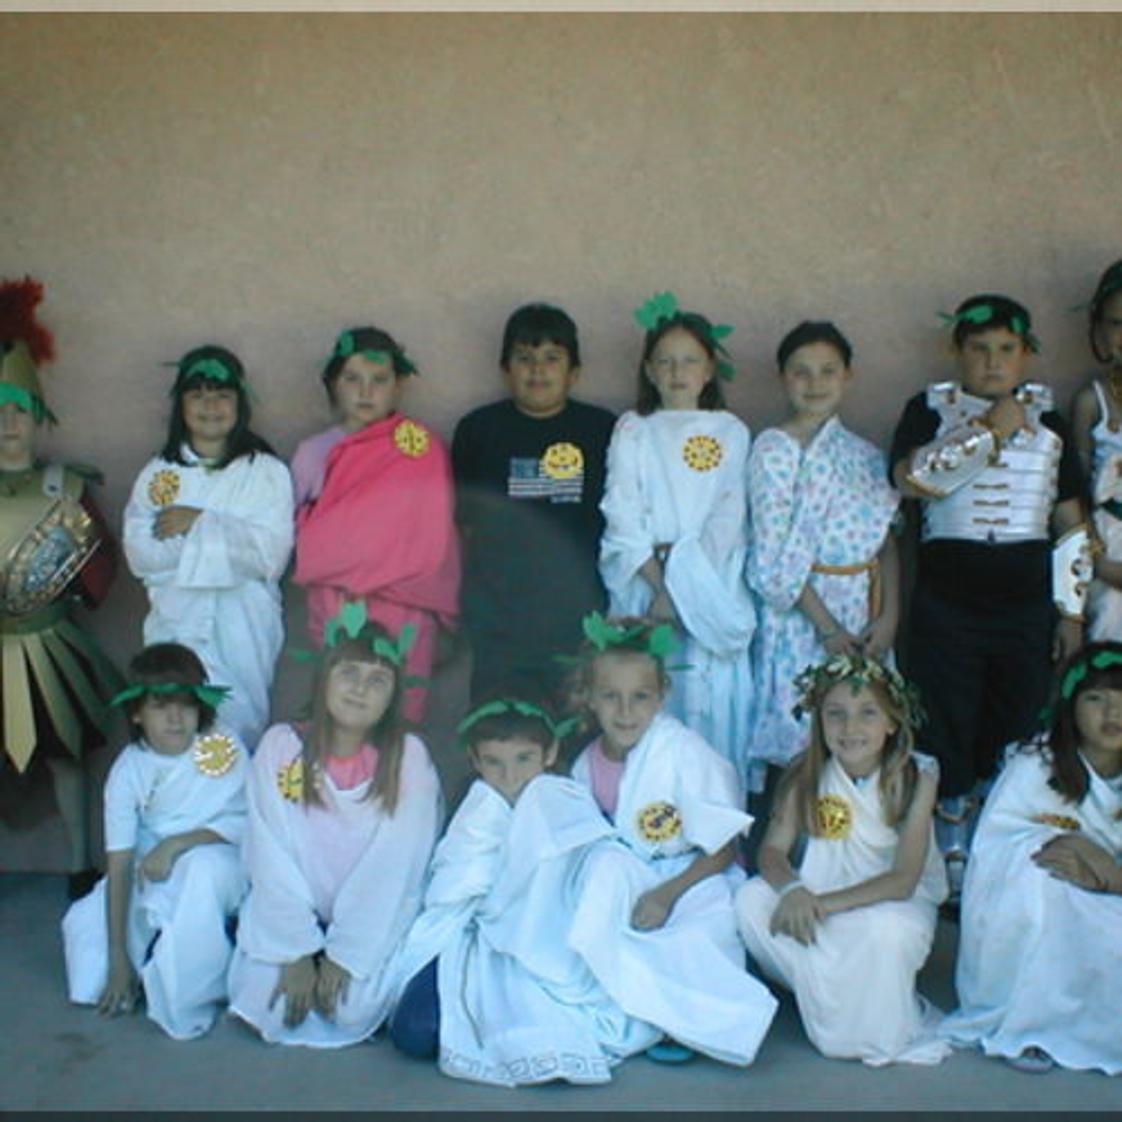 Grace Lutheran Preschool Photo - Third Grade History studies Ancient Rome. Here the class is pictured on the final day of the unit, experiencing Roman dress, food, and activities.